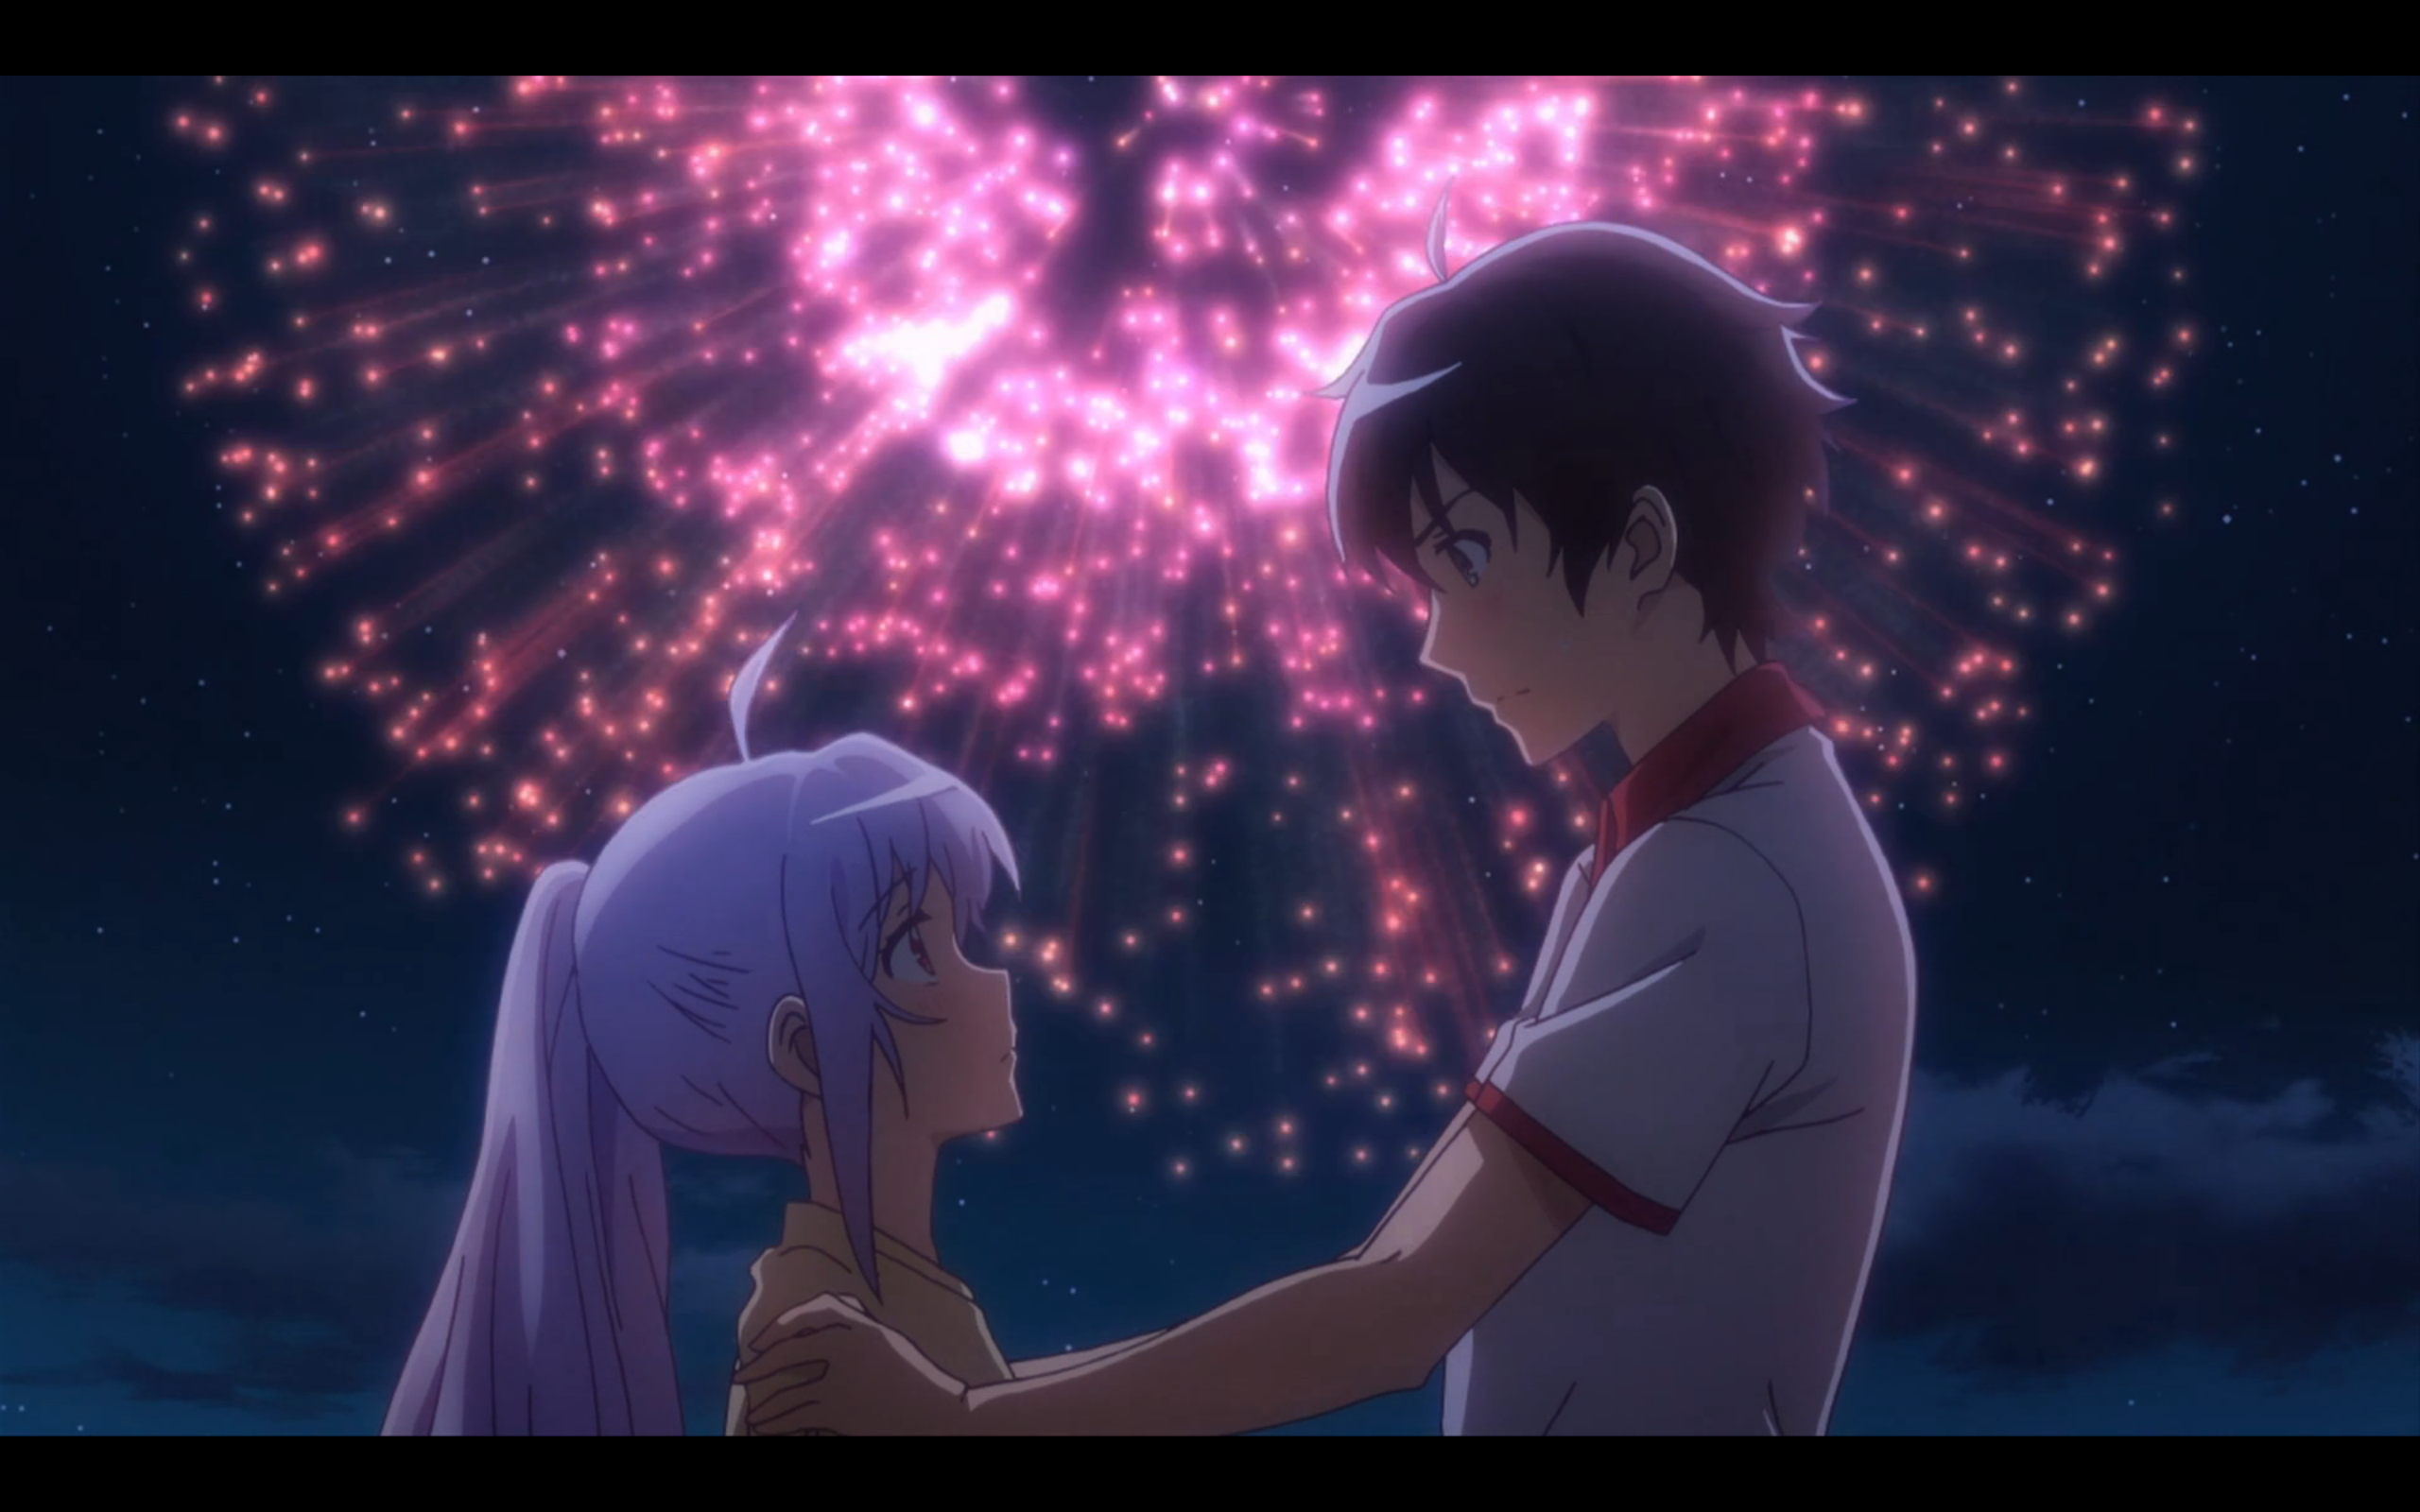 Plastic Memories Finale Review! By WhyNoAnime